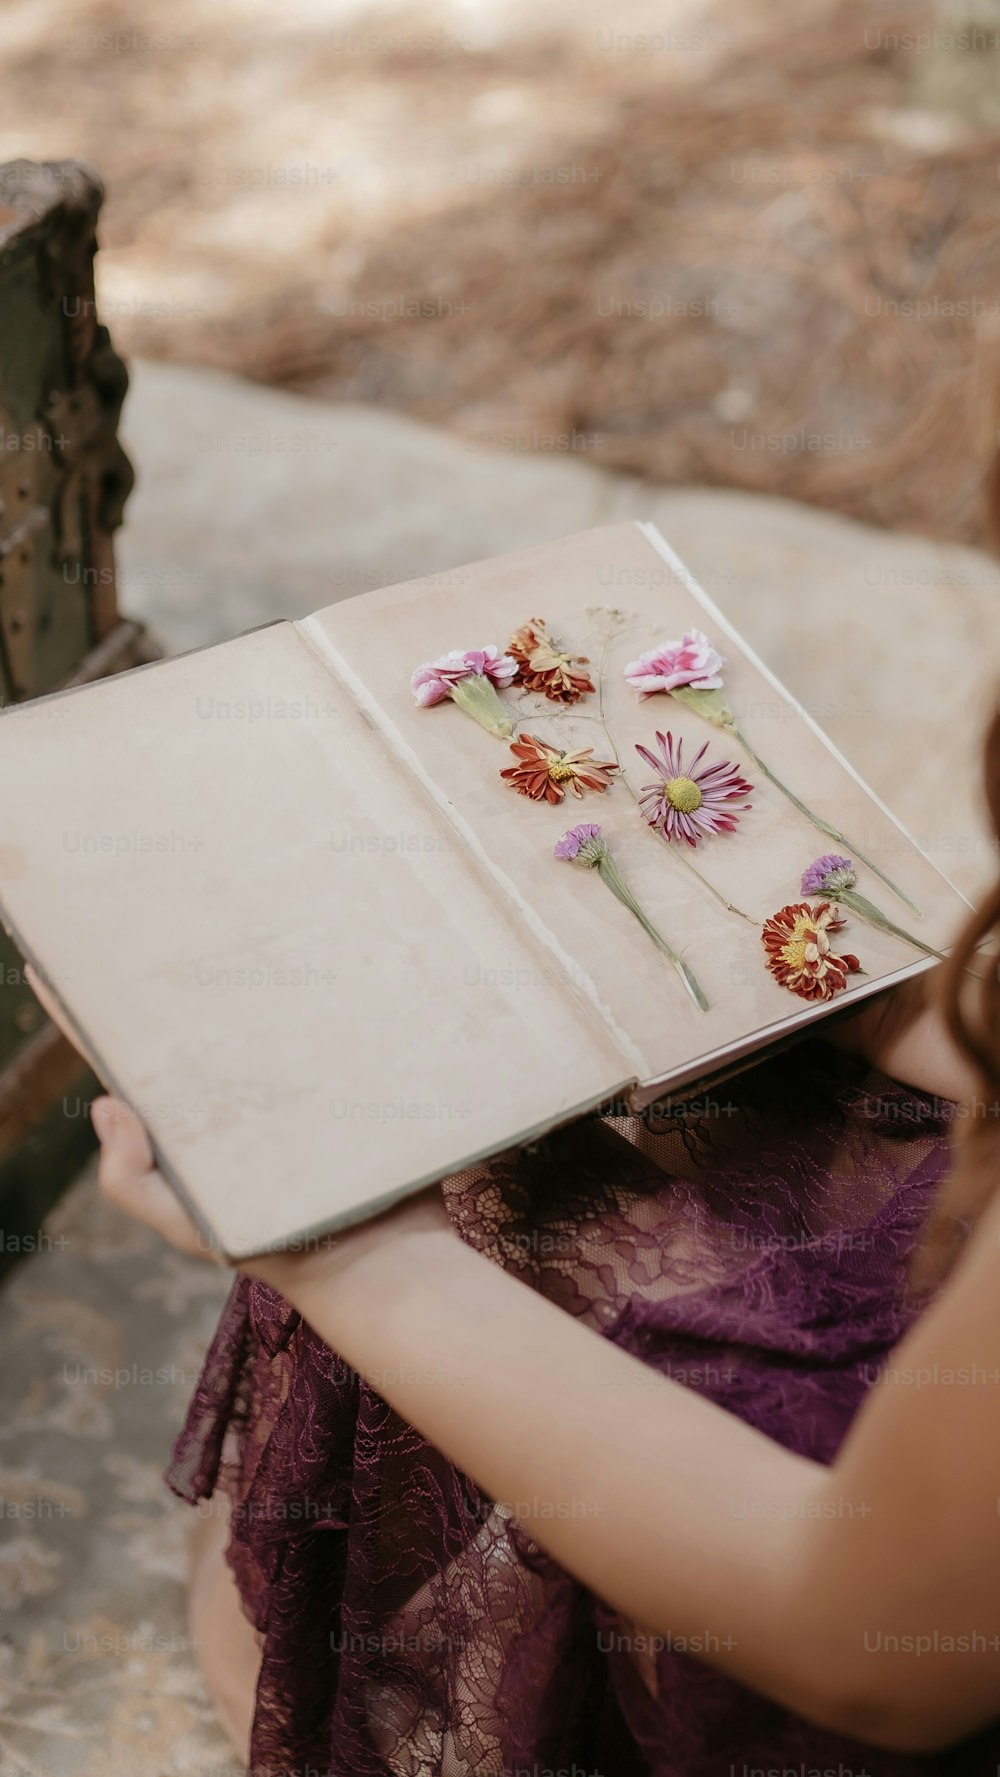 a woman holding a book with flowers on it